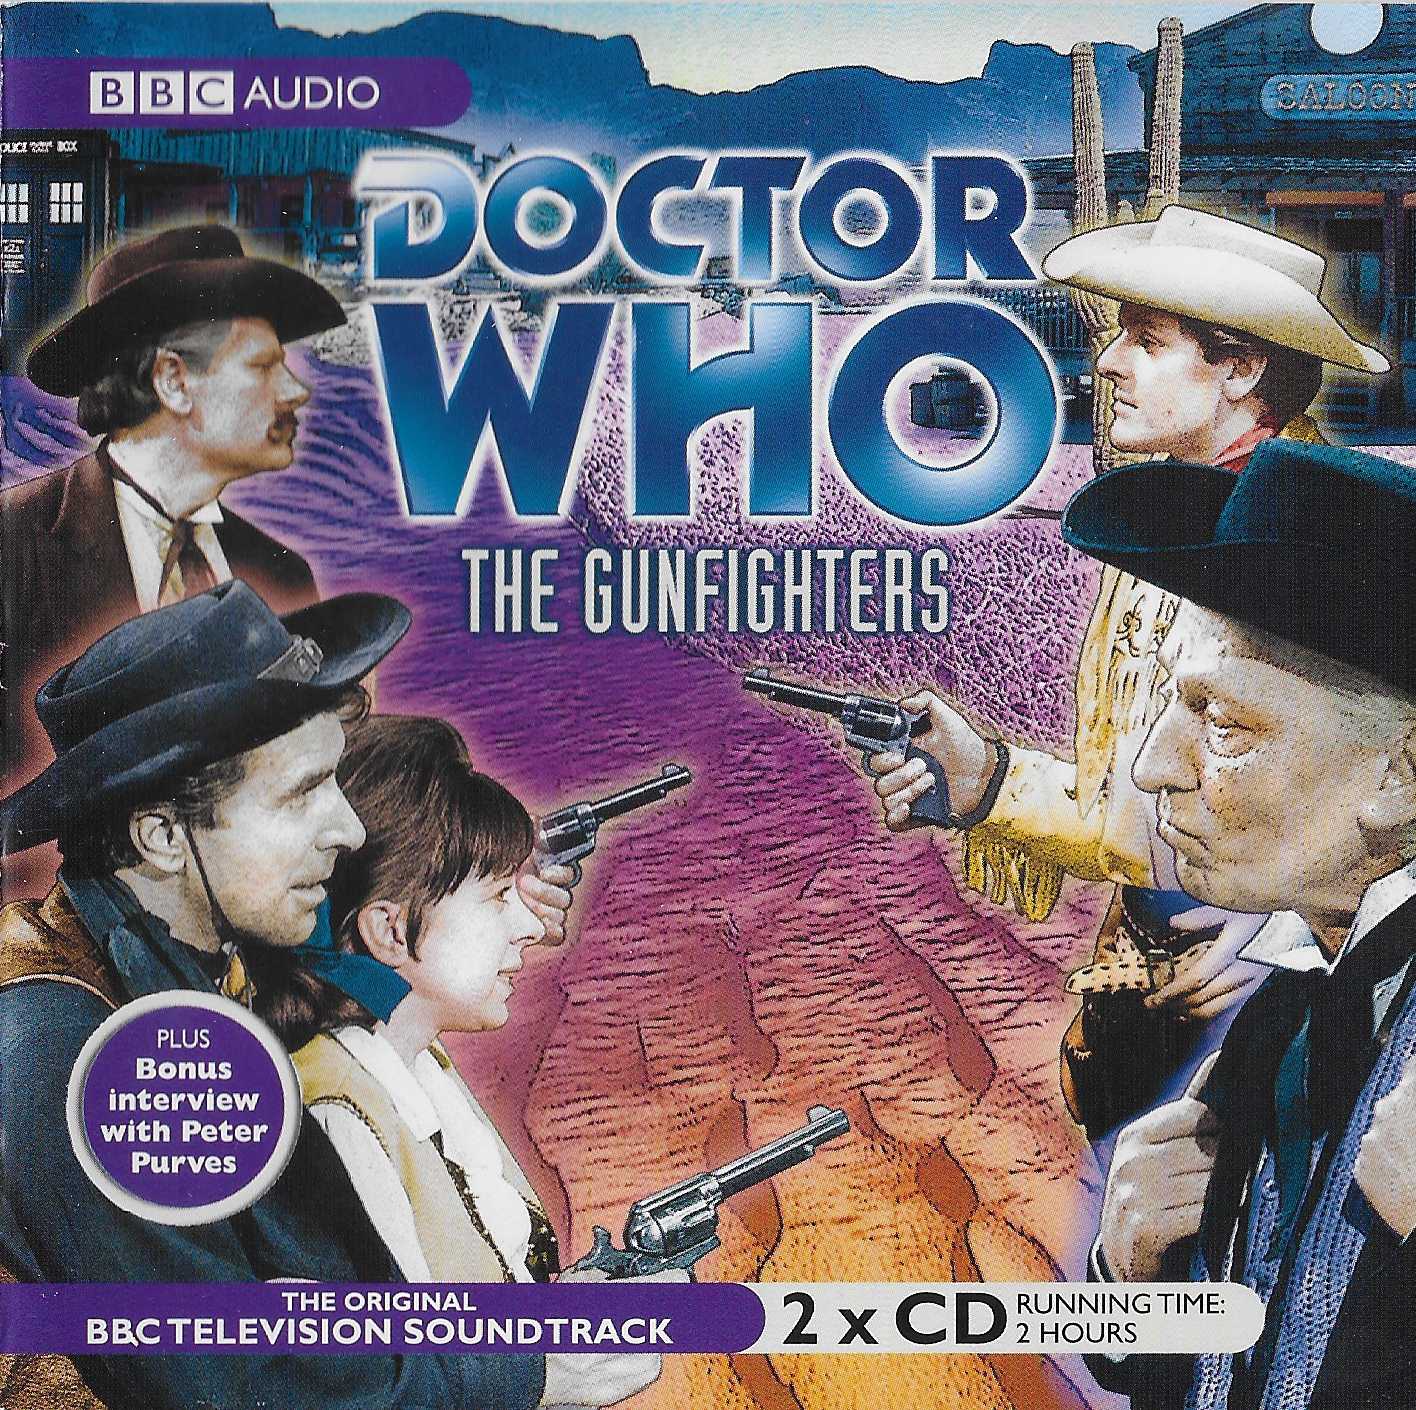 Picture of ISBN 978-1-4056-7691-5 Doctor Who - The gunfighters by artist Donald Cottom from the BBC records and Tapes library